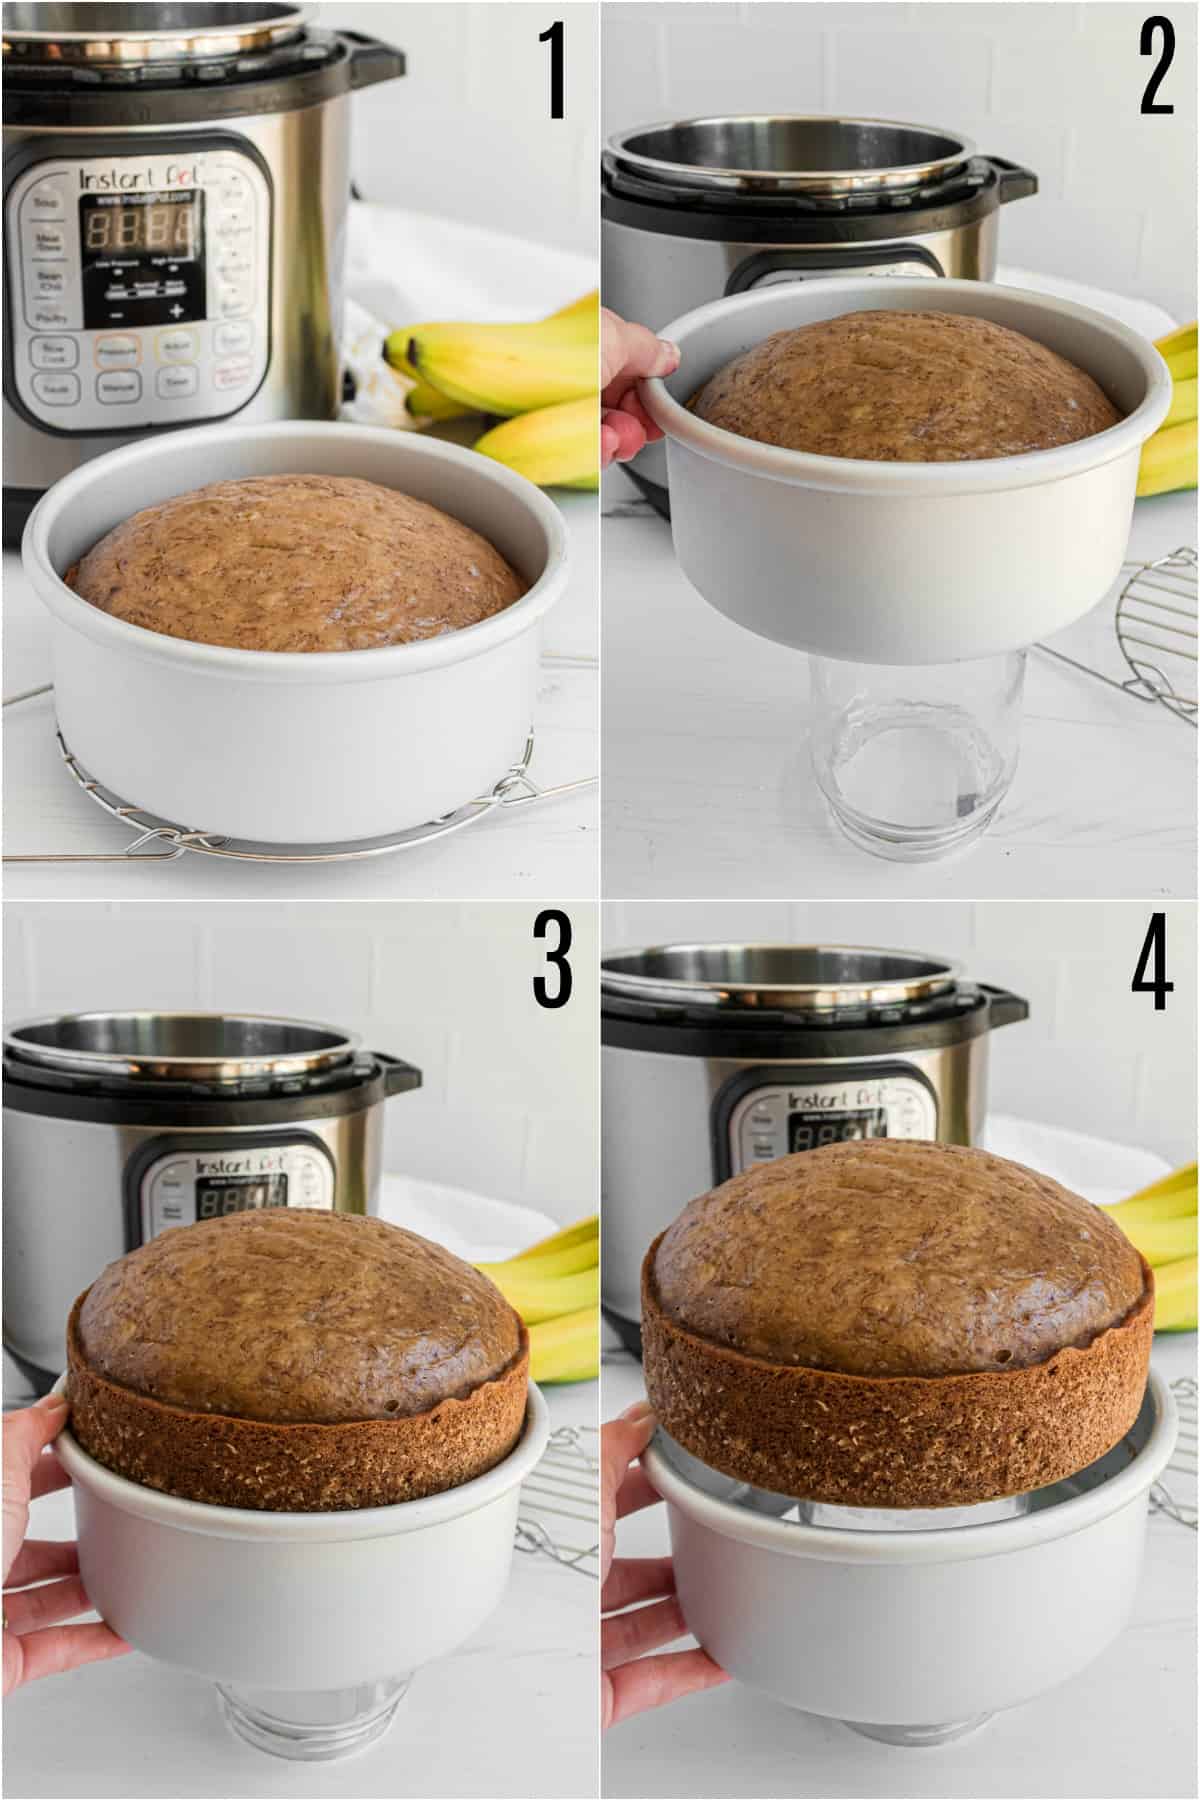 Step by step photos showing how to remove banana bread from push pan.